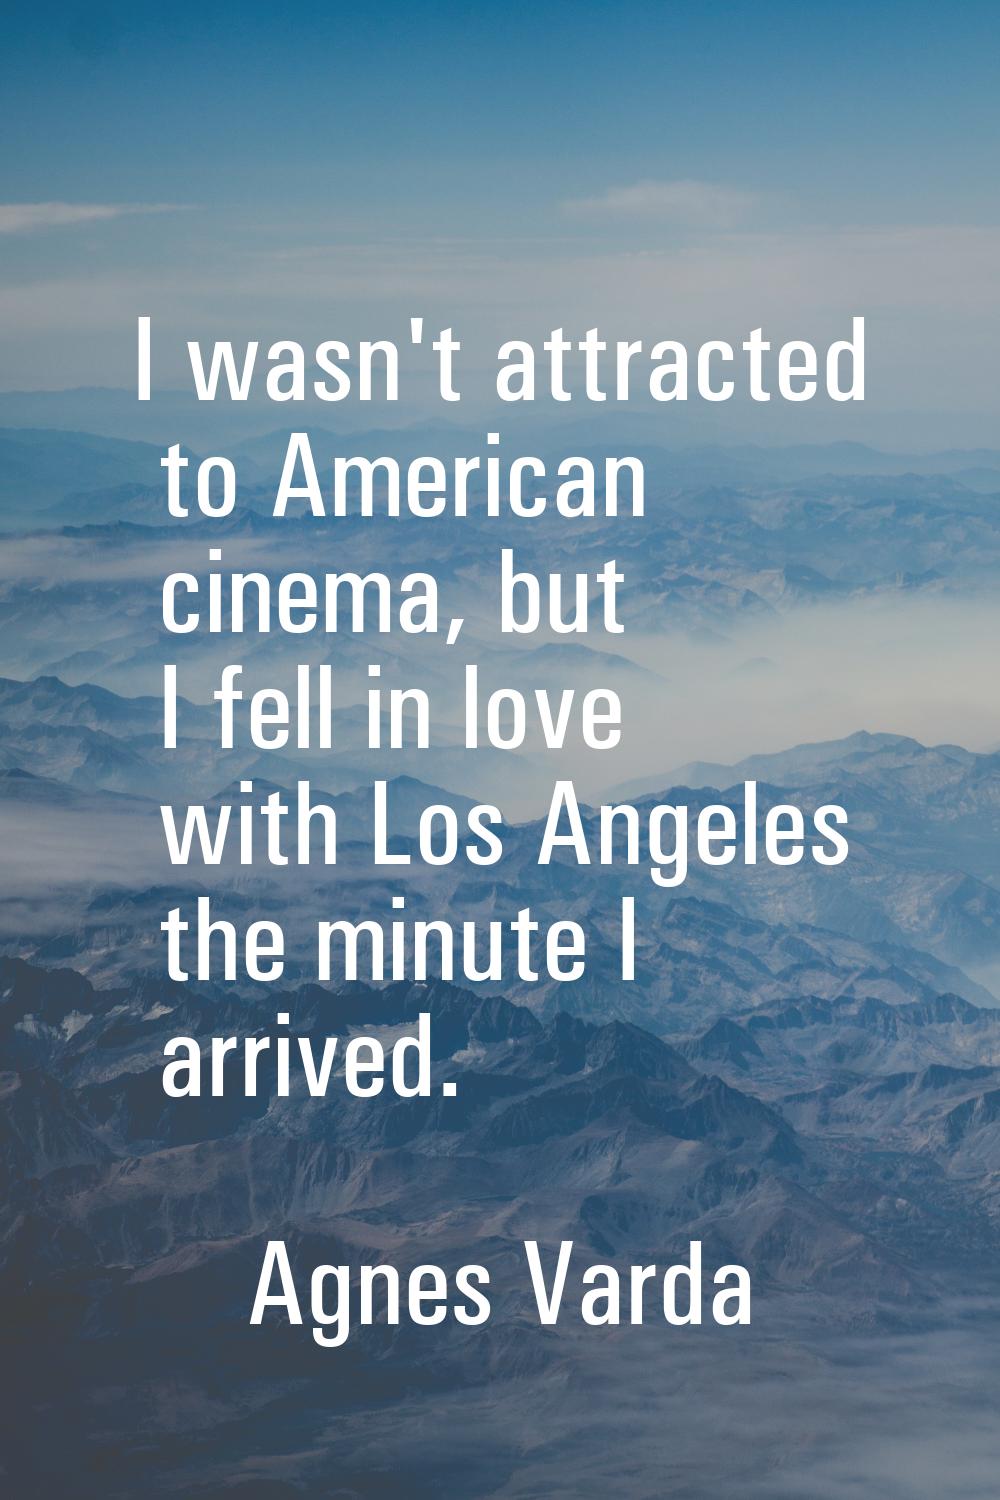 I wasn't attracted to American cinema, but I fell in love with Los Angeles the minute I arrived.